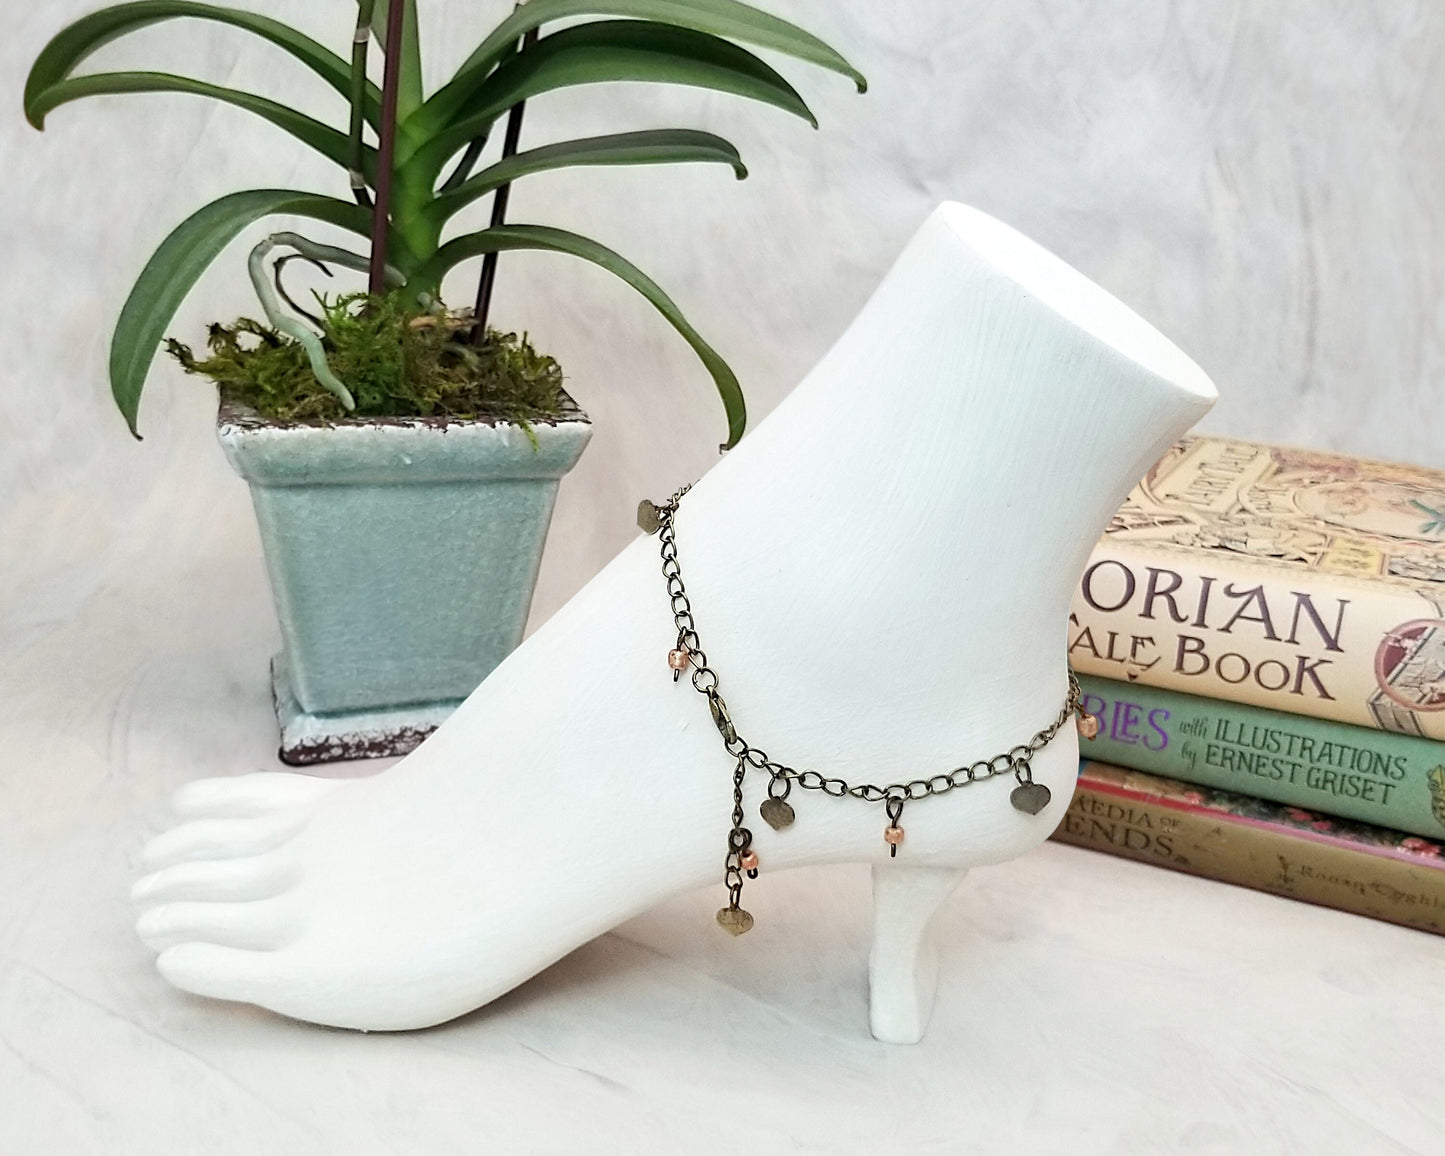 Chain Anklet or Bracelet in Matte Gold, Adjustable, Beach, Boho, Bohemian, Gypsy, Steampunk, Choice of Colors and Metals